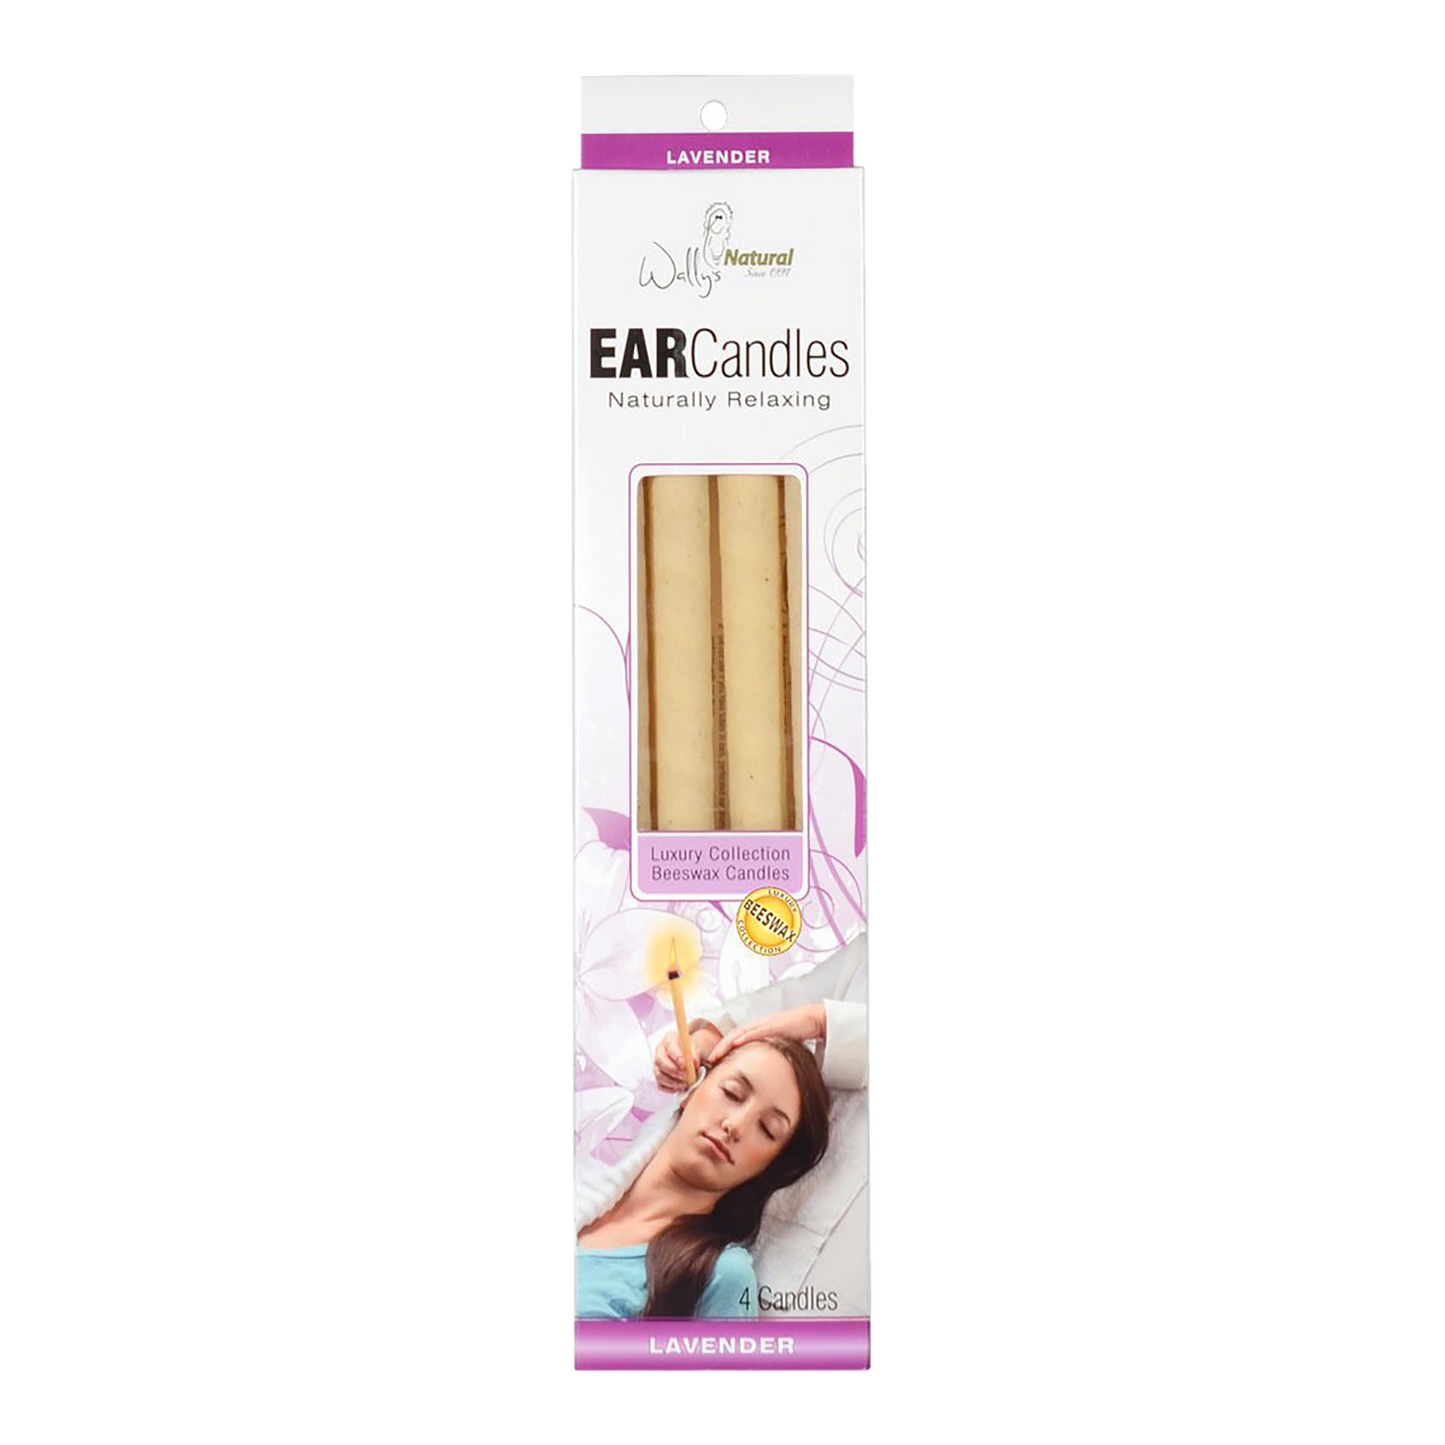 Wally's Natural - Ear Candles - Lavender (4 pack)